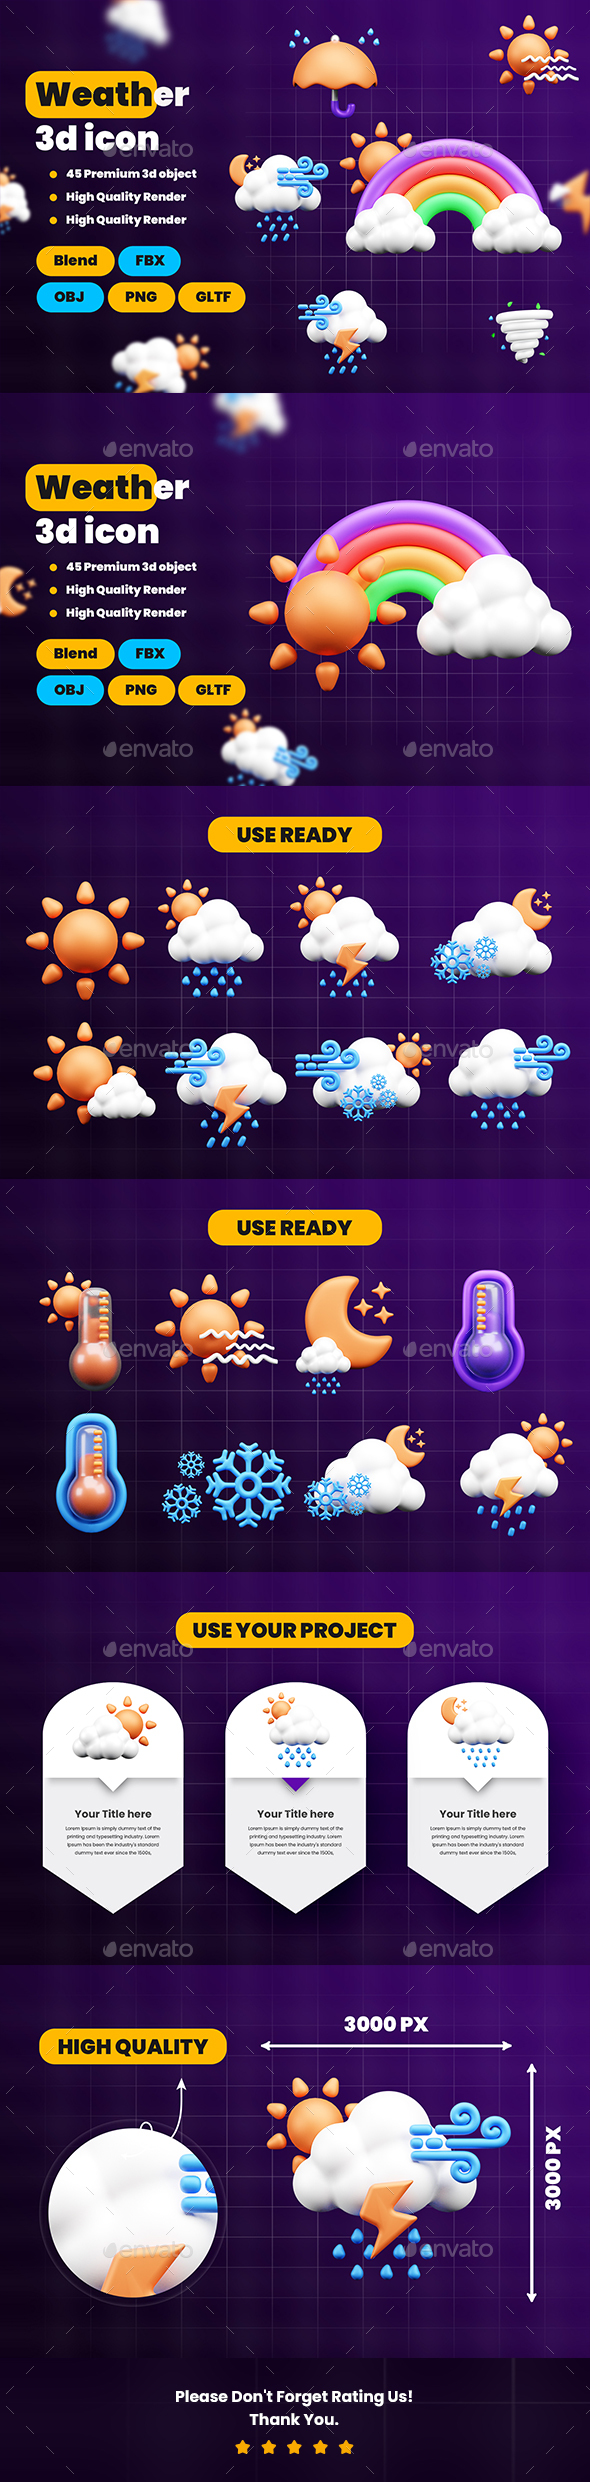 [DOWNLOAD]Weather 3d Illustration  Icon Pack